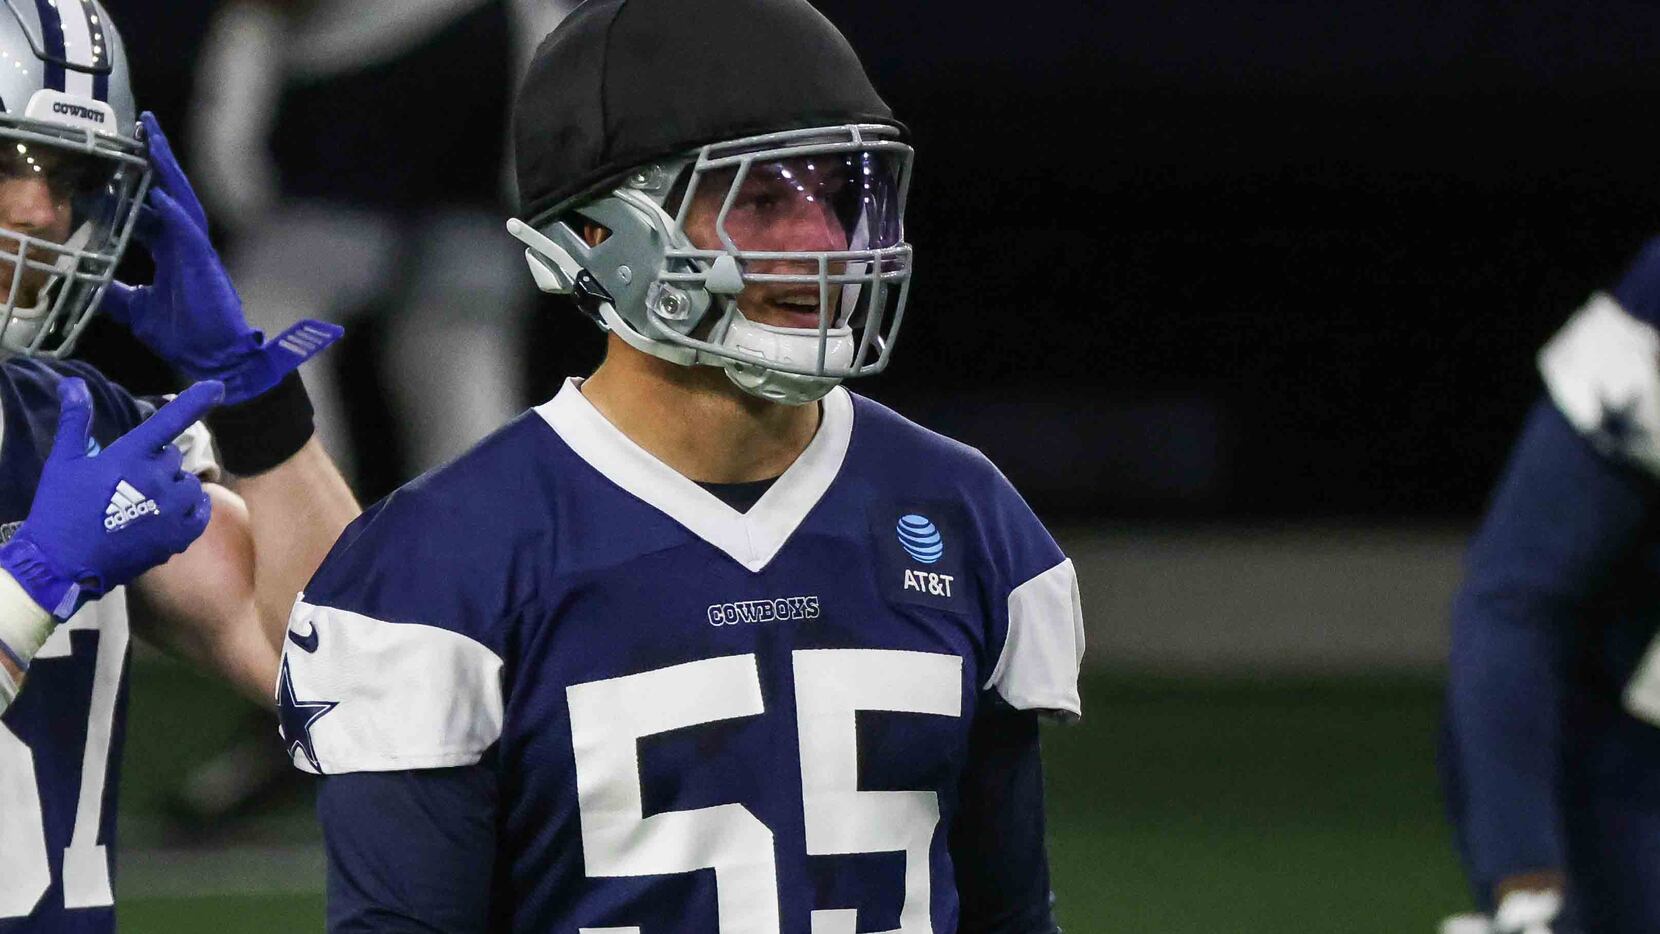 Focusing only on what he can control, Cowboys' Leighton Vander Esch is  optimistic about his health, returning to old role